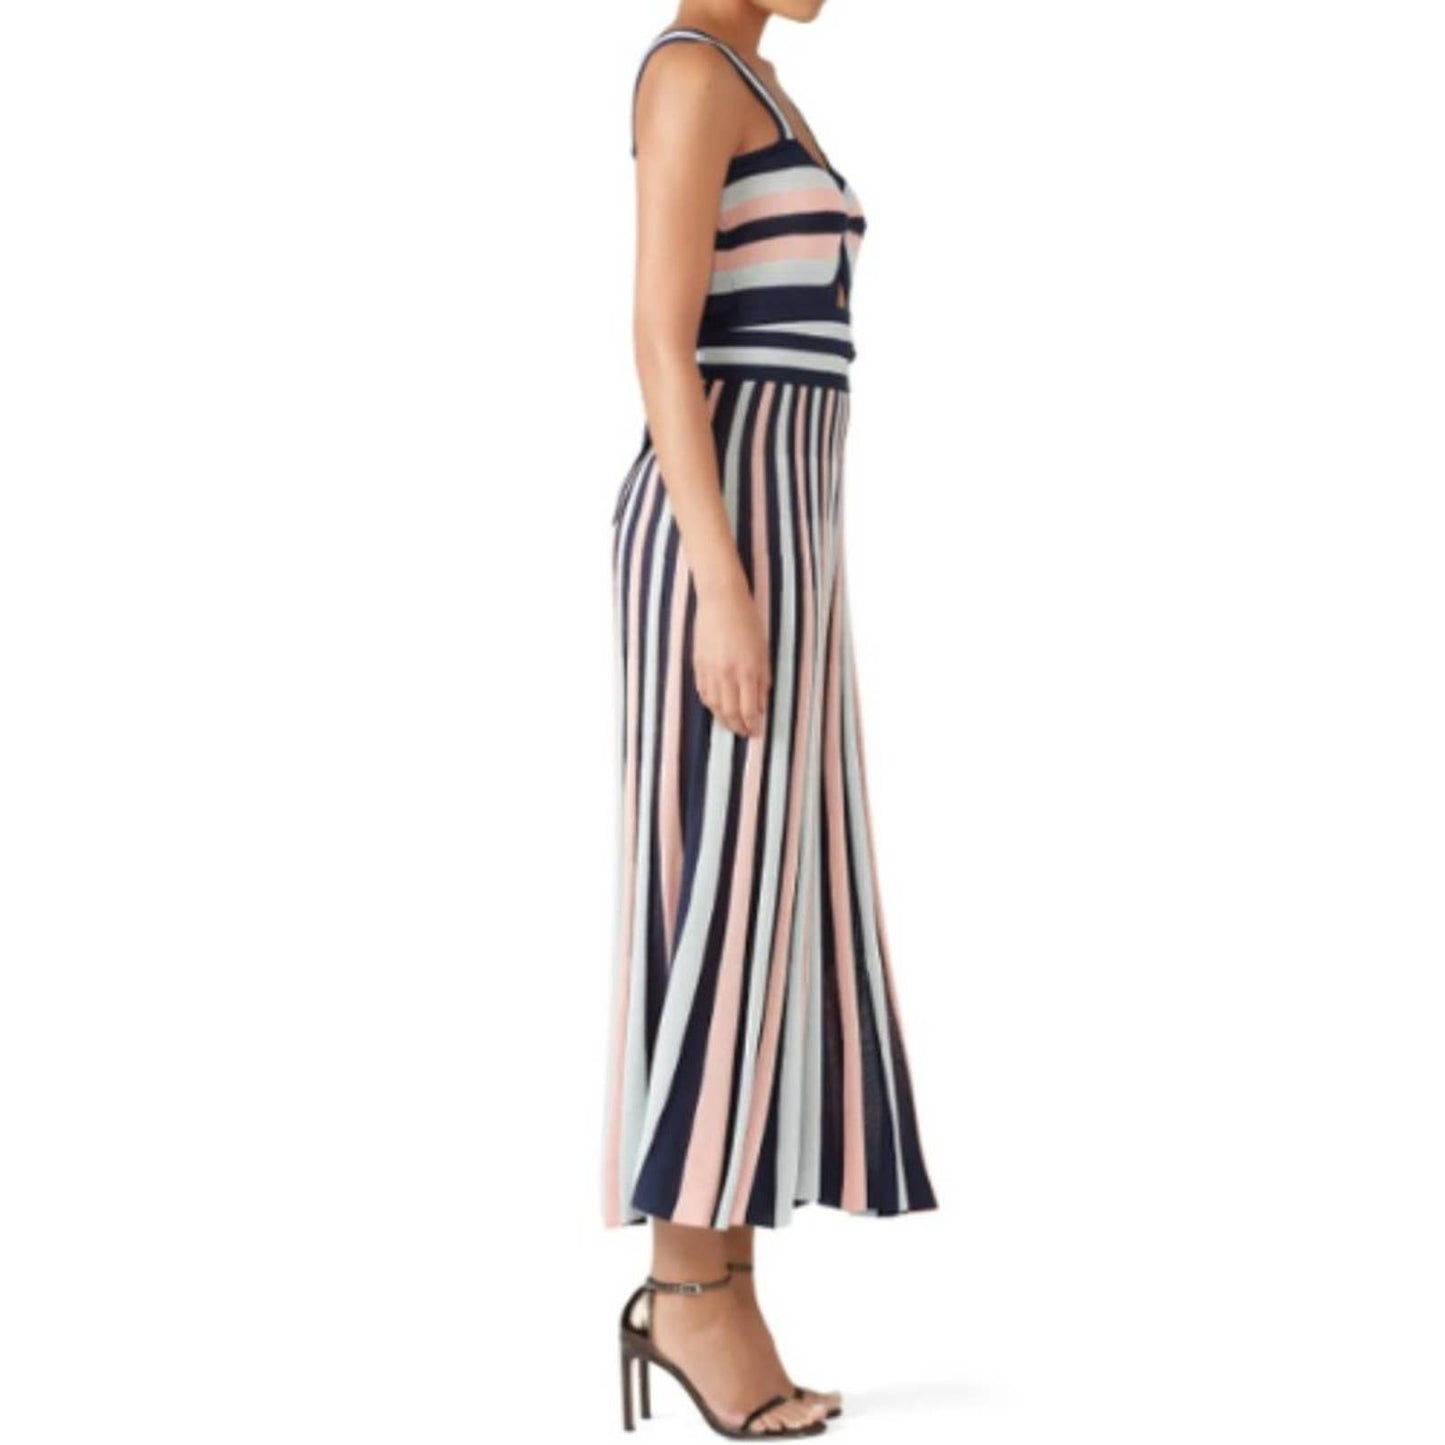 Temperley London Isabella Knit Jumpsuit in Striped Size Small R